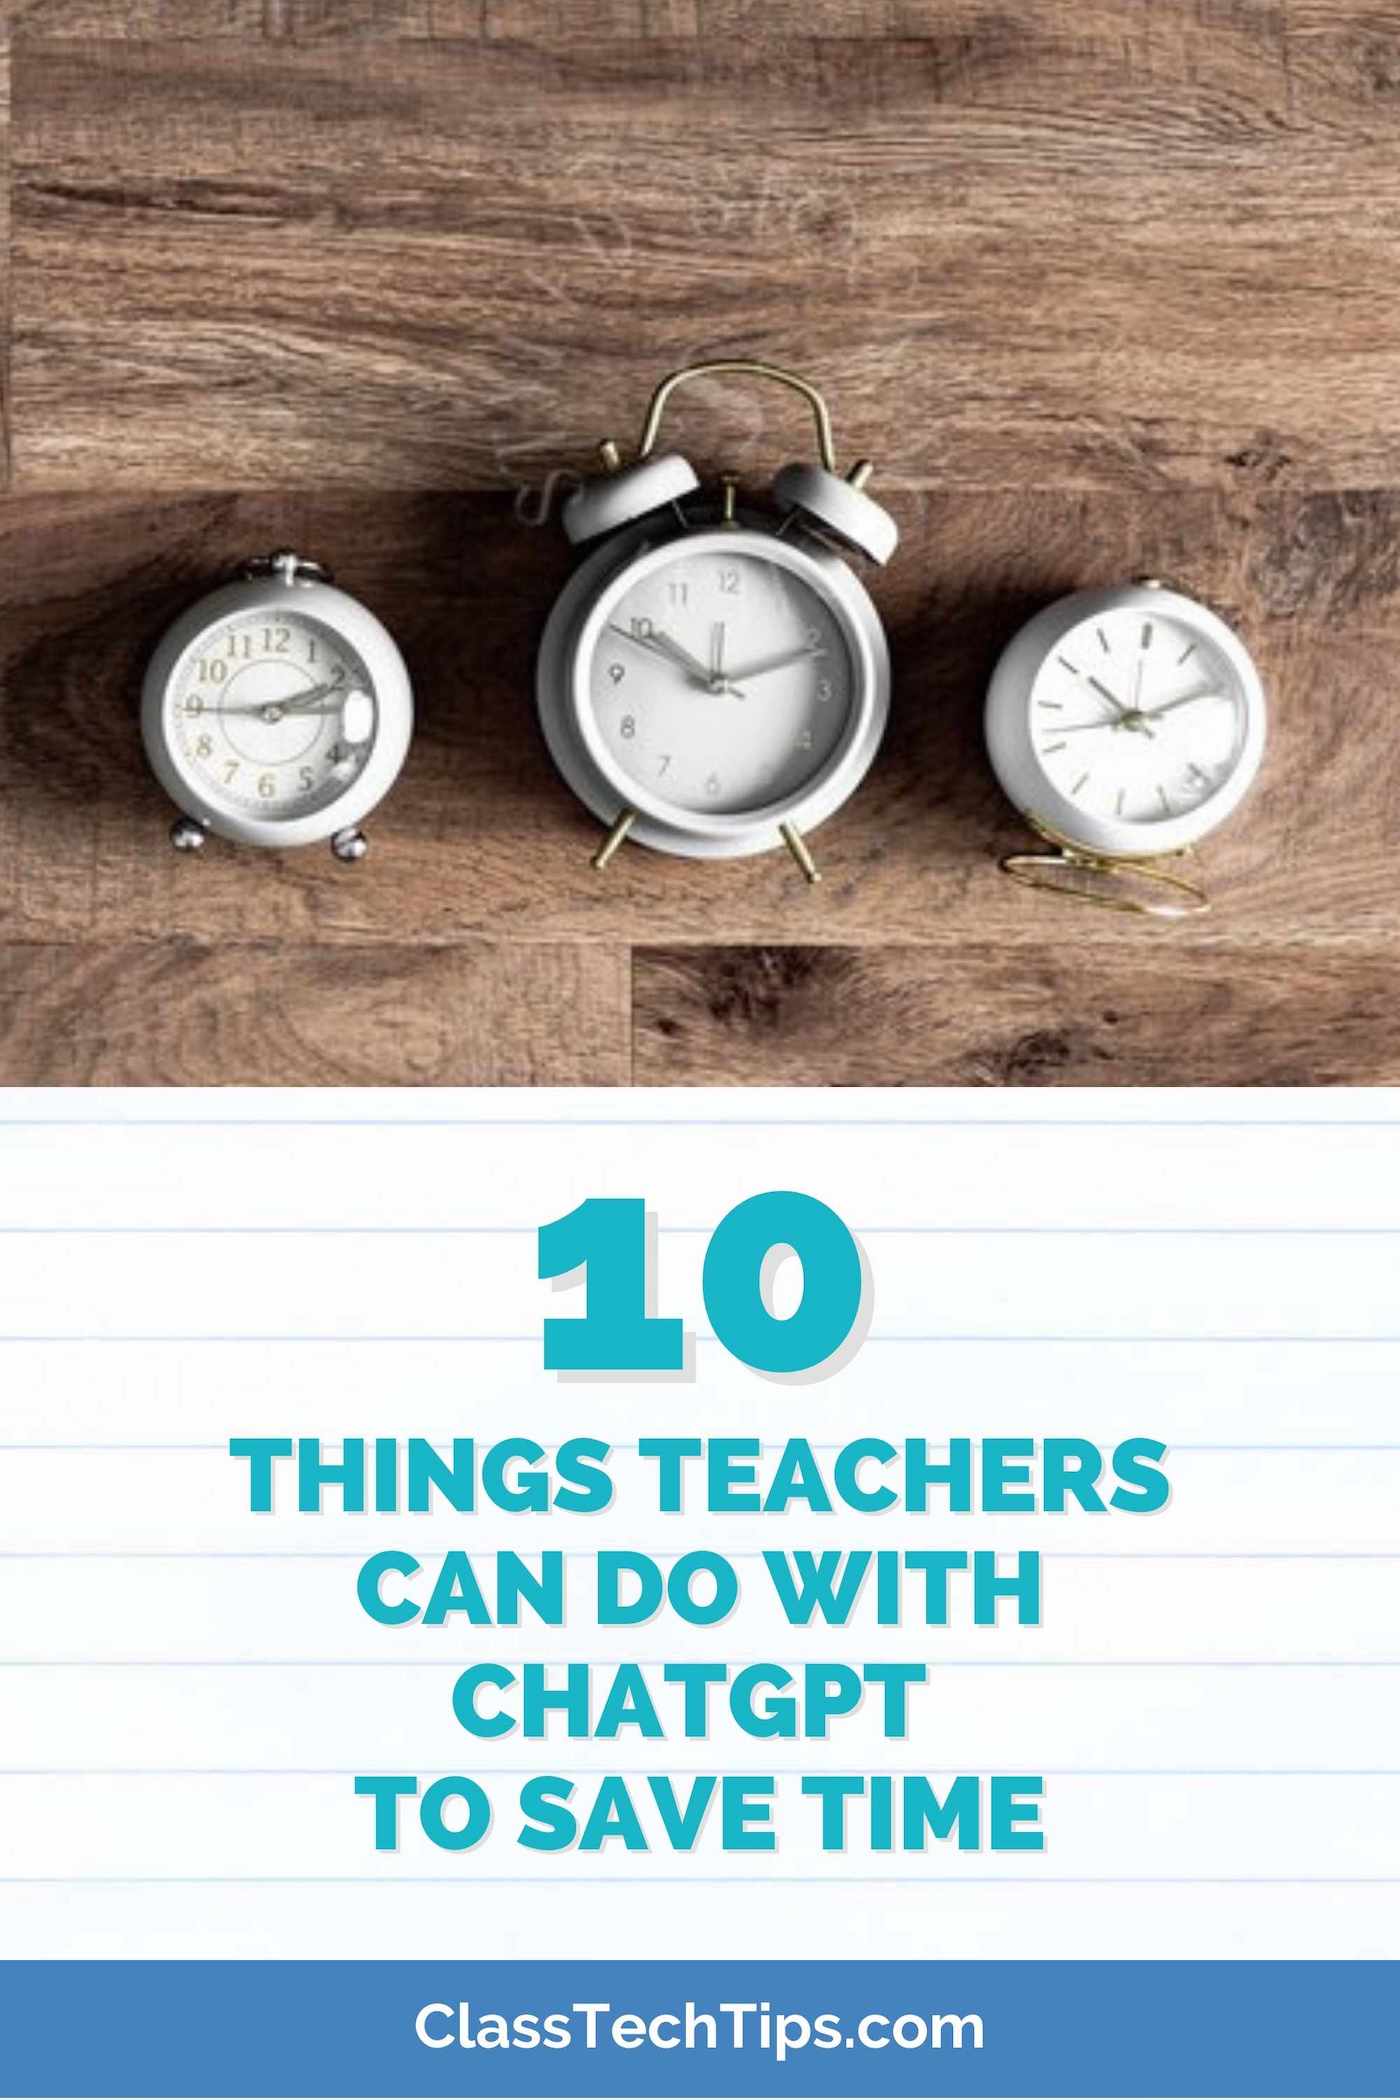 10 Things Teachers Can Do with ChatGPT to Save Time